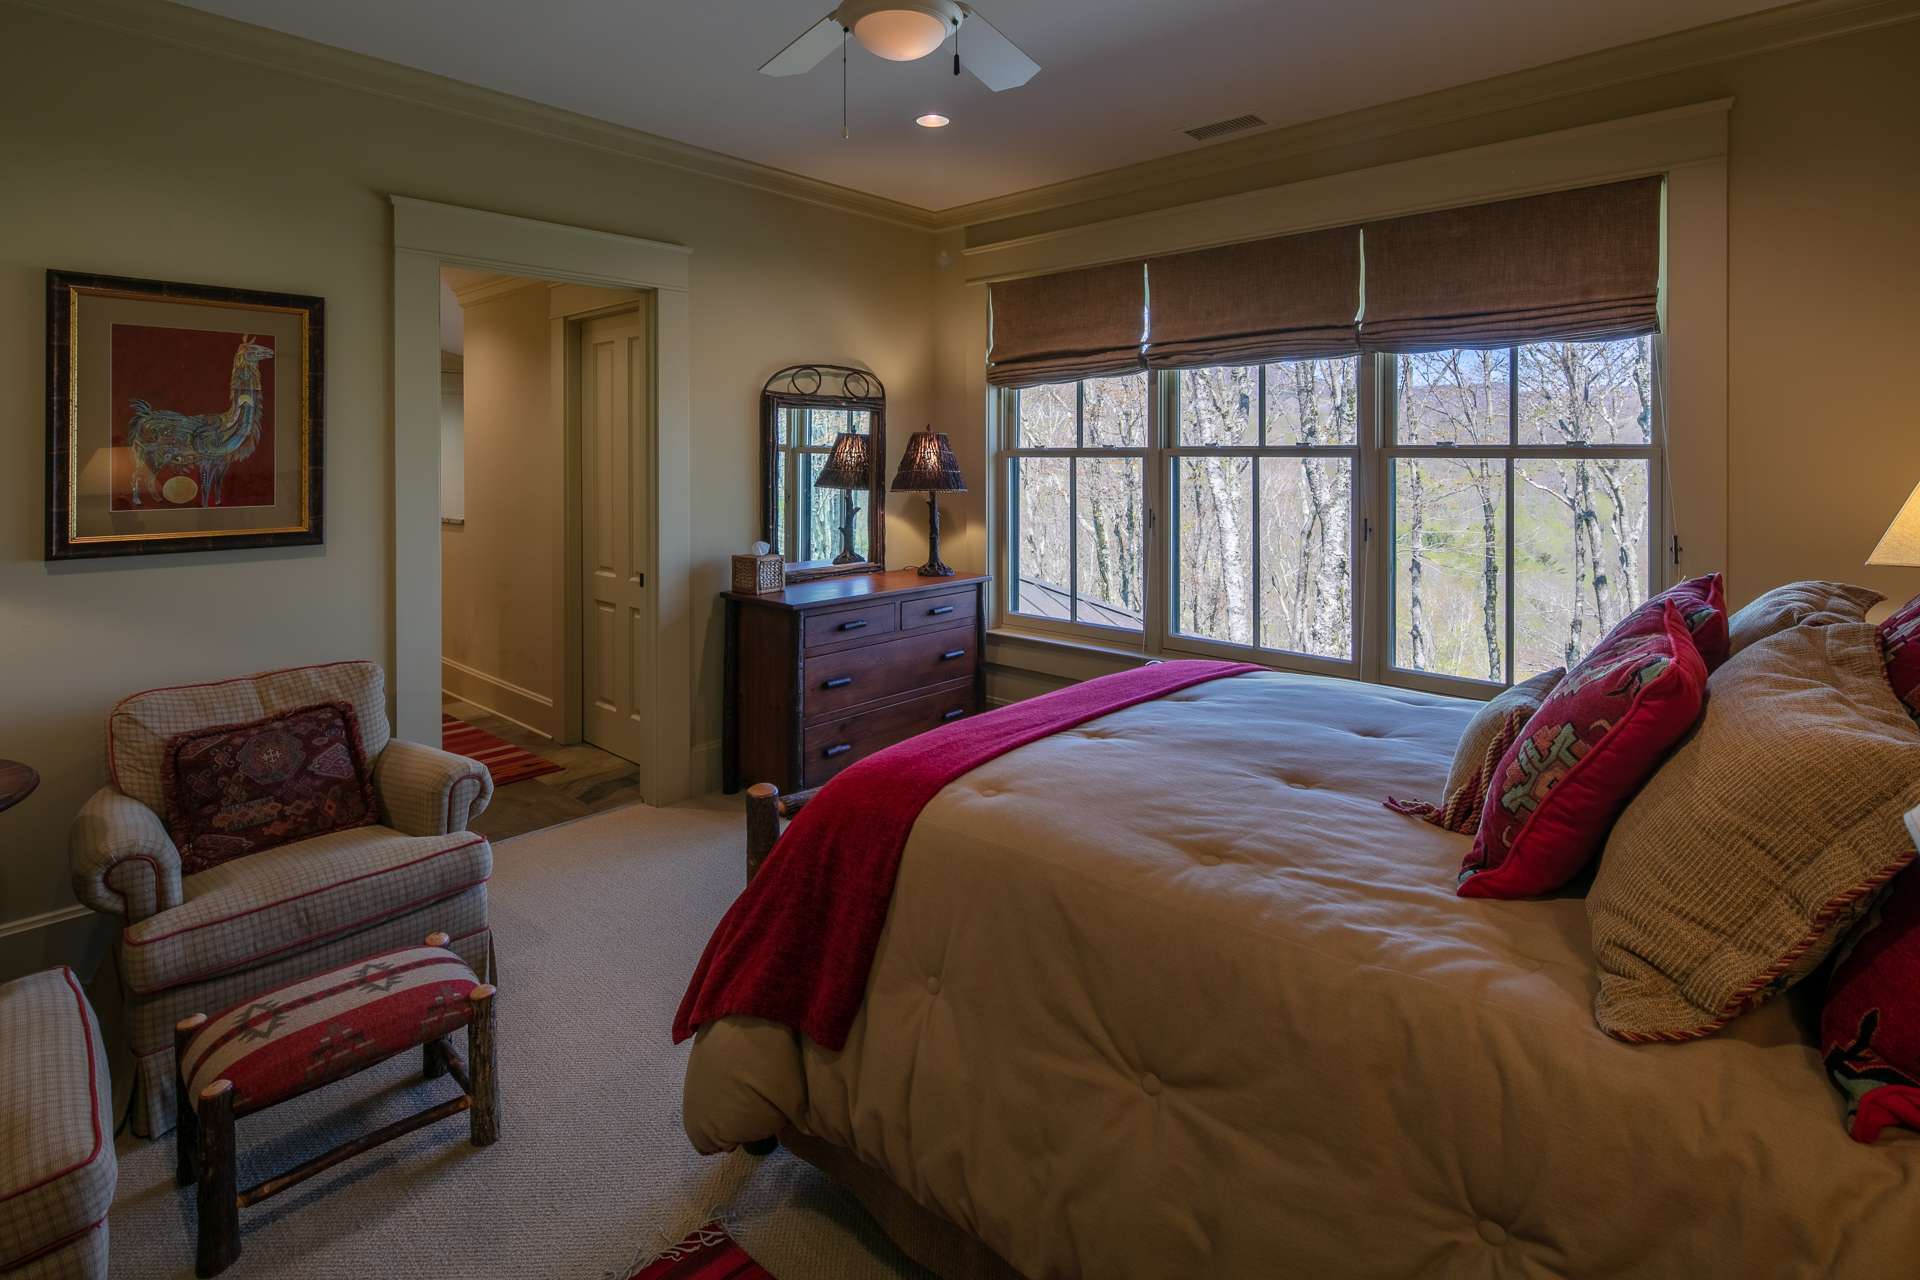 Family or guests will feel at home in any of the three spacious en suite bedrooms on the upper level.